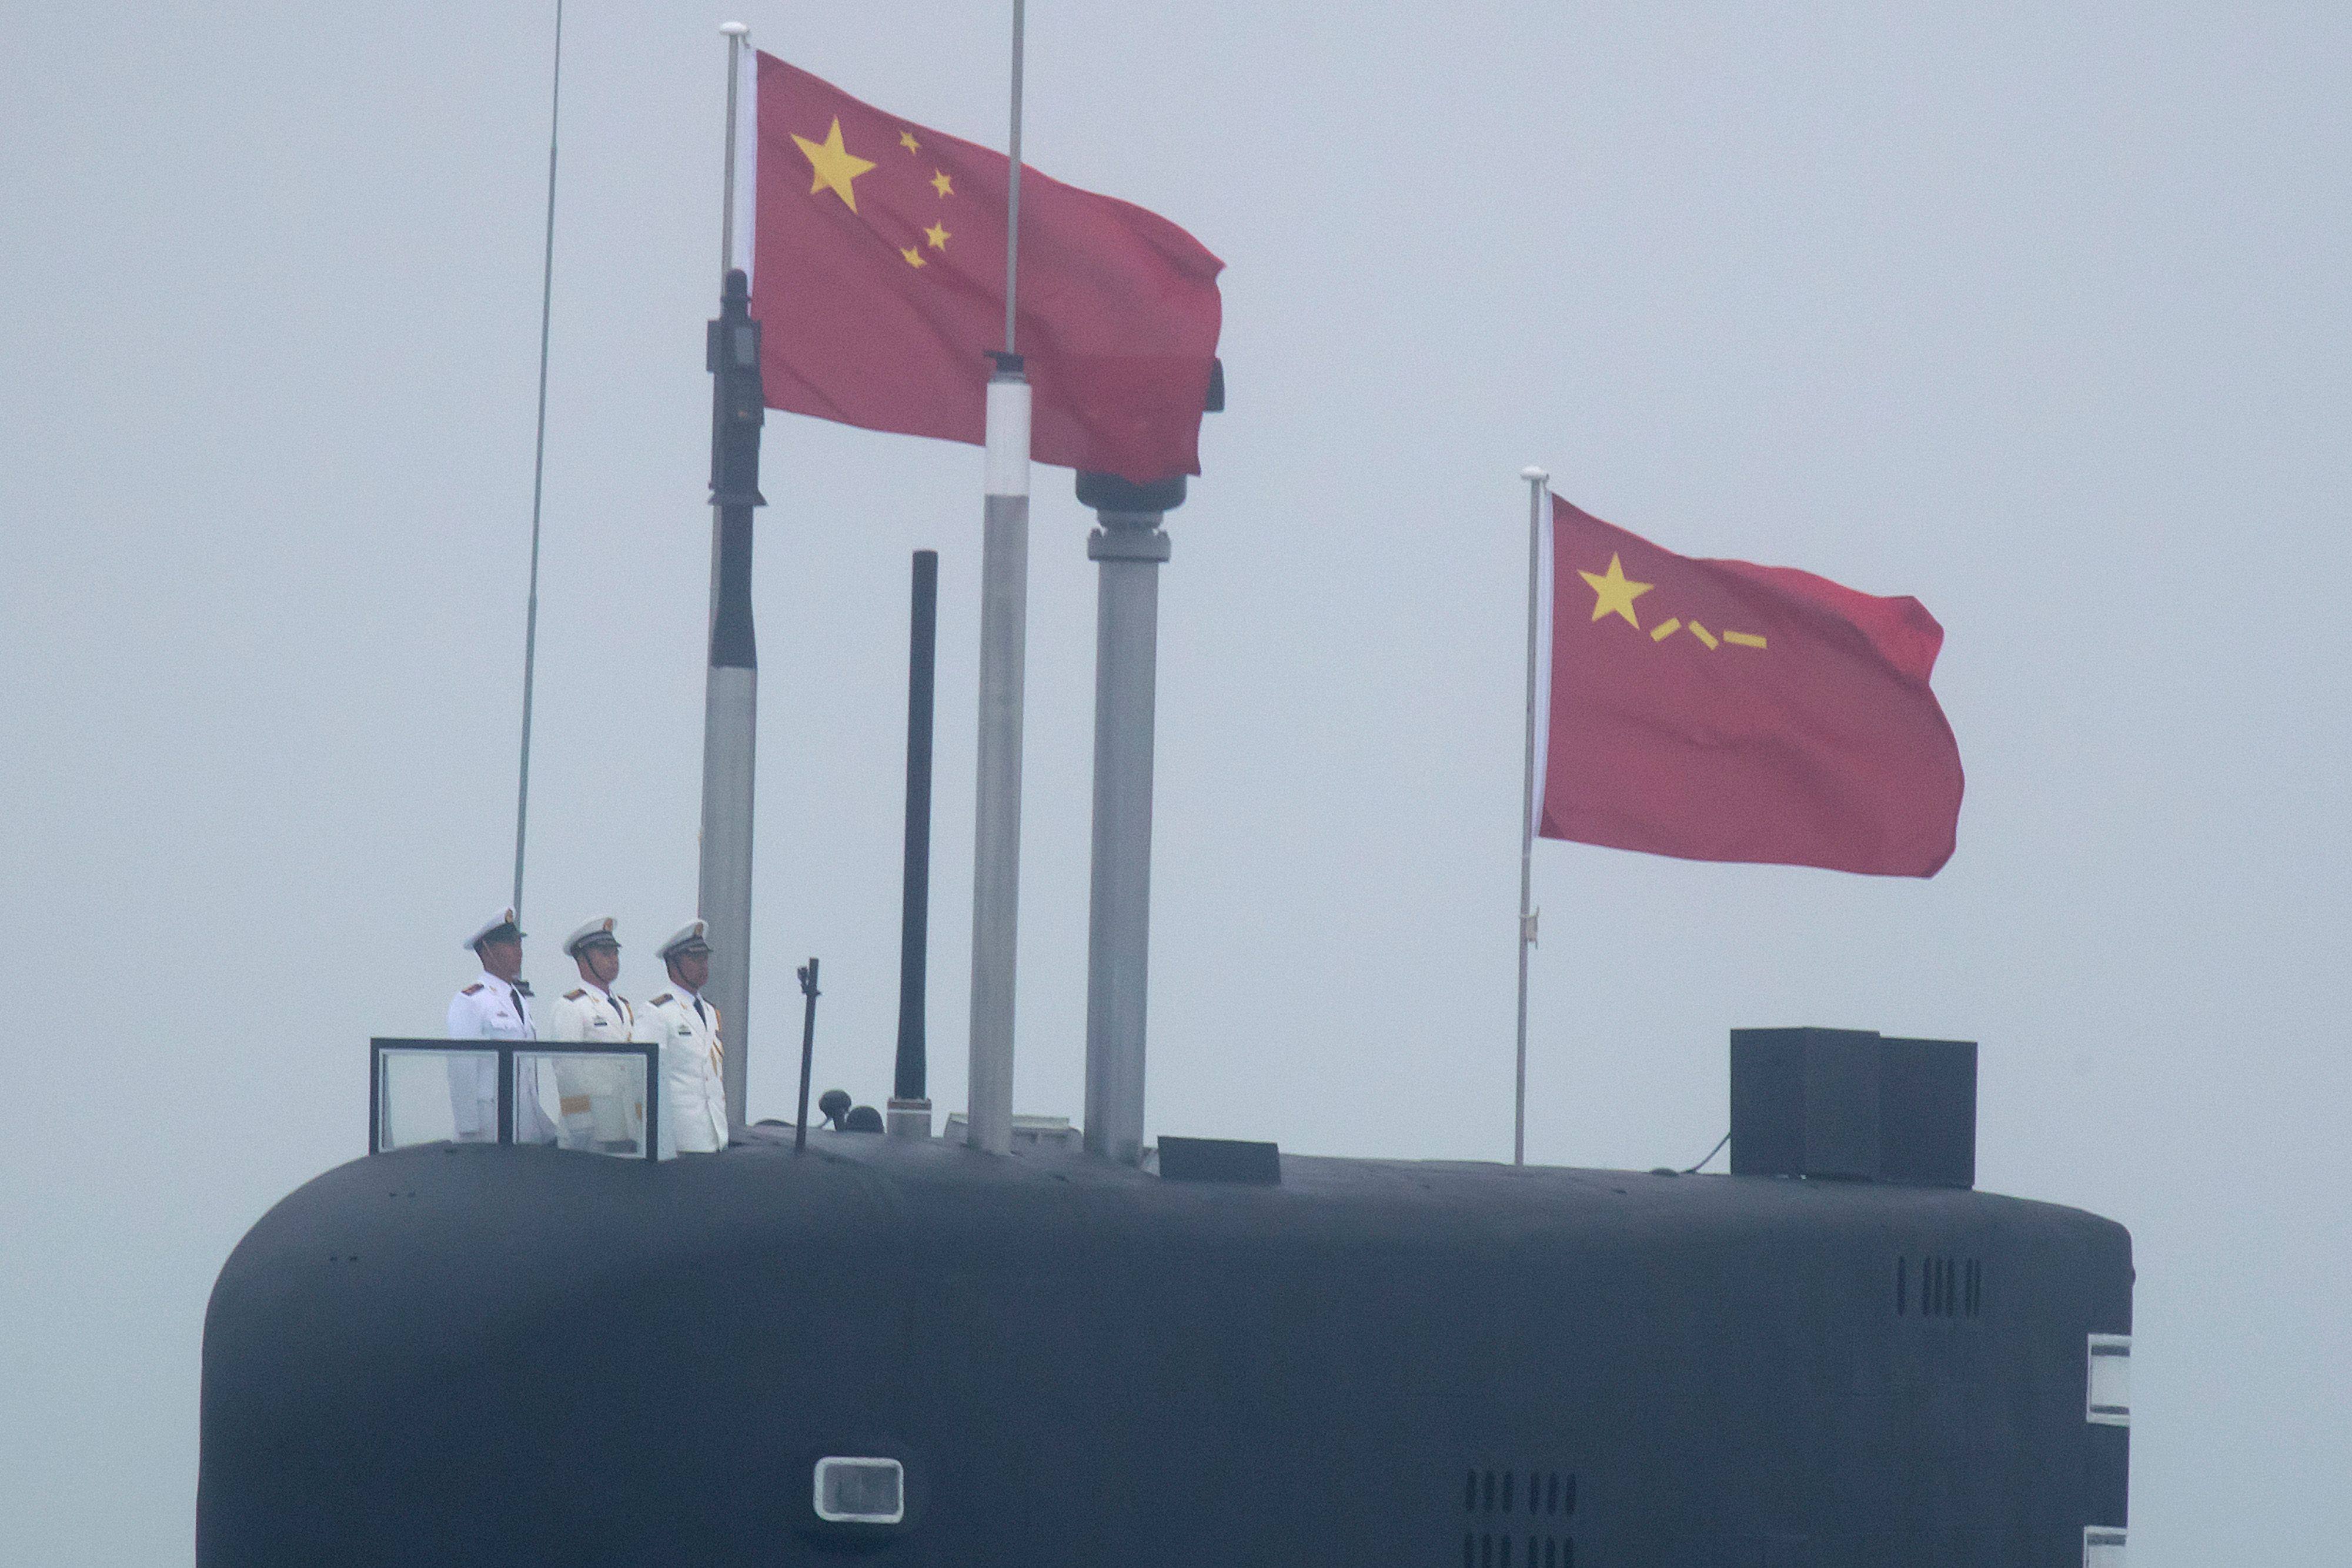 China’s Type 094A submarines can fire missiles that can reach the US mainland. Photo: AFP